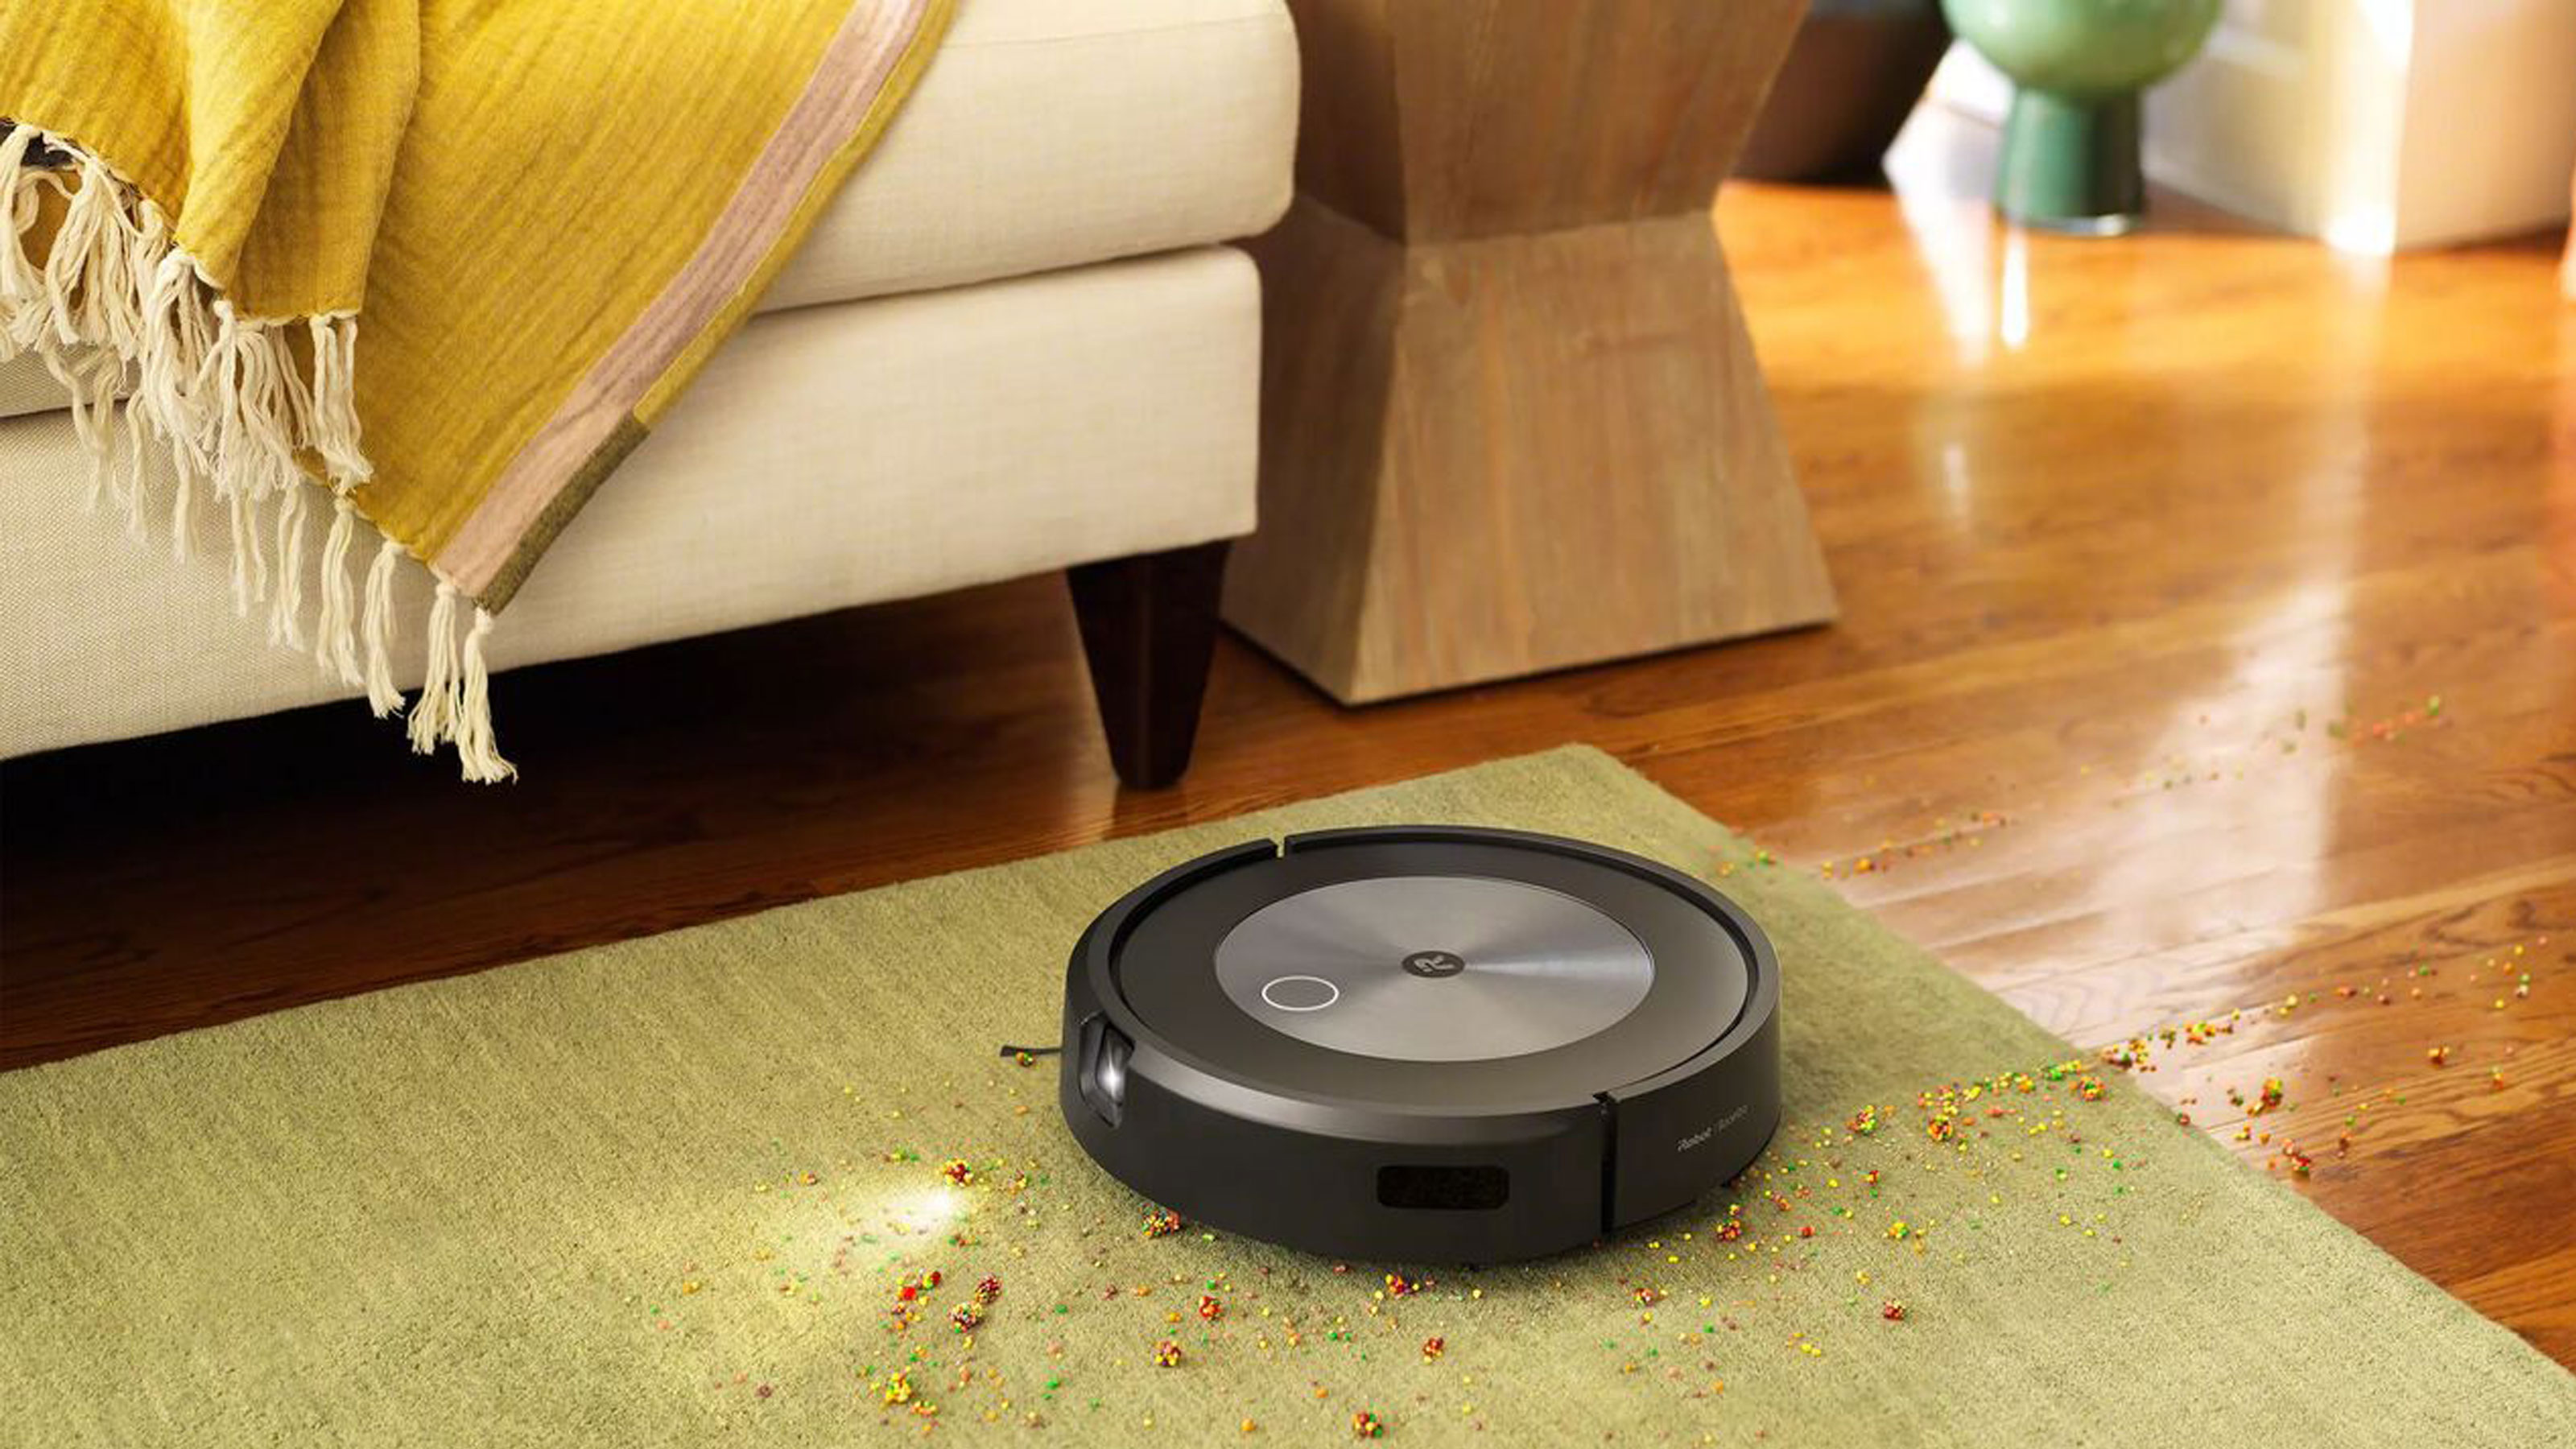 Roomba's newest robot vacuums are up to $400 off for Cyber Monday